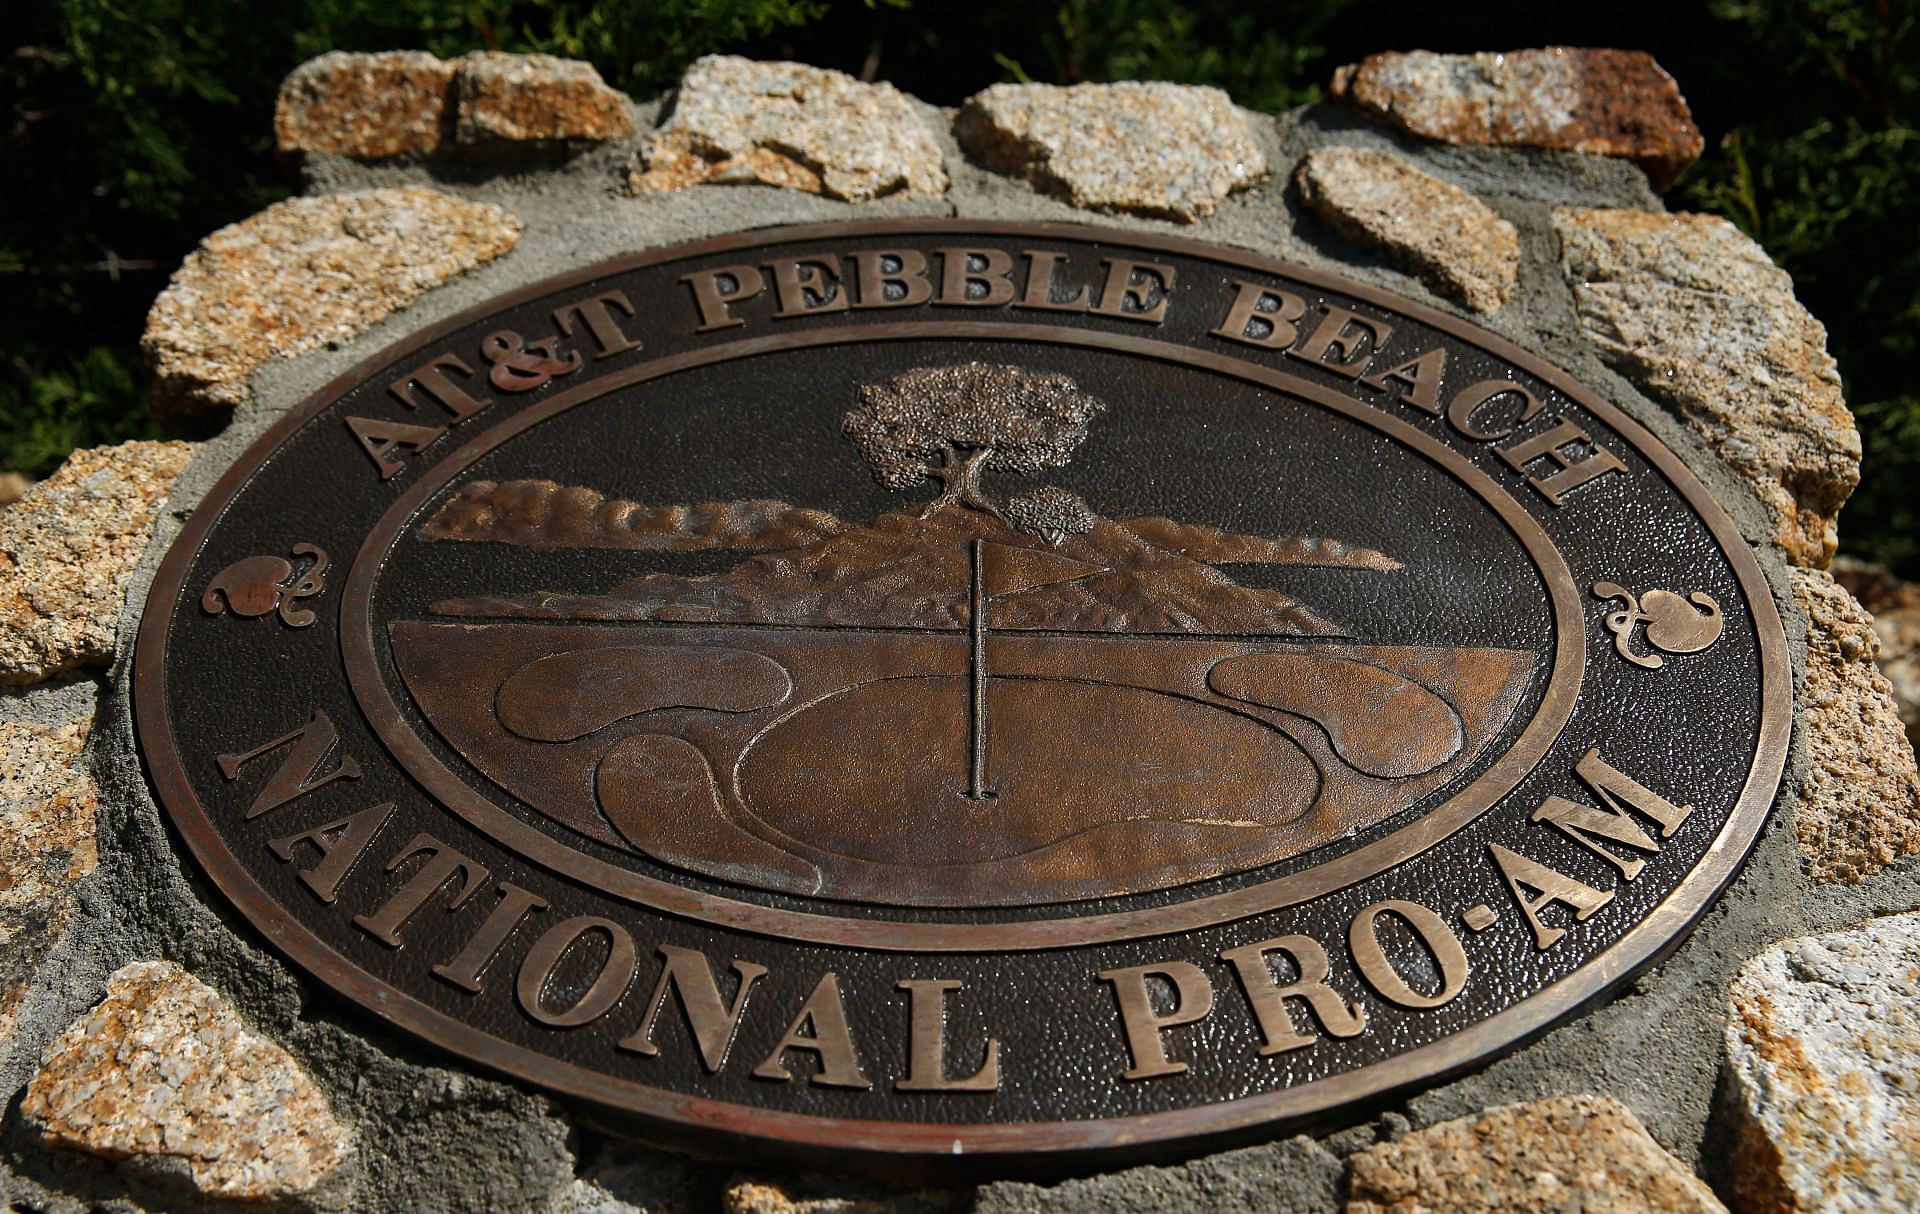 AT&T Pebble Beach ProAm slashes field down to 80 players fighting to